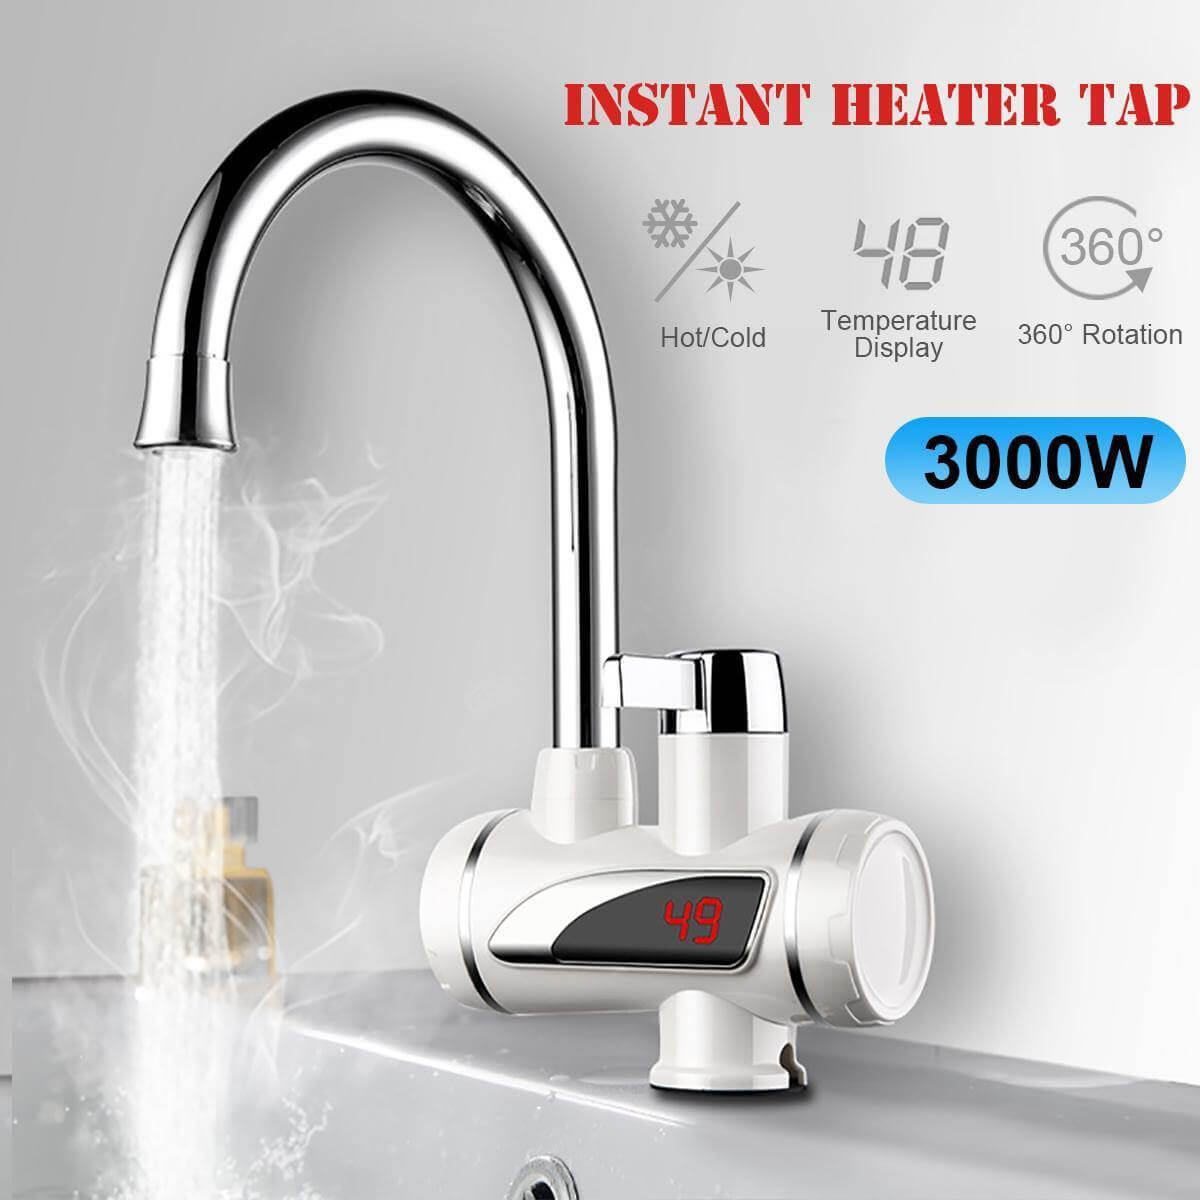 Instant Electric Water Heater Tap